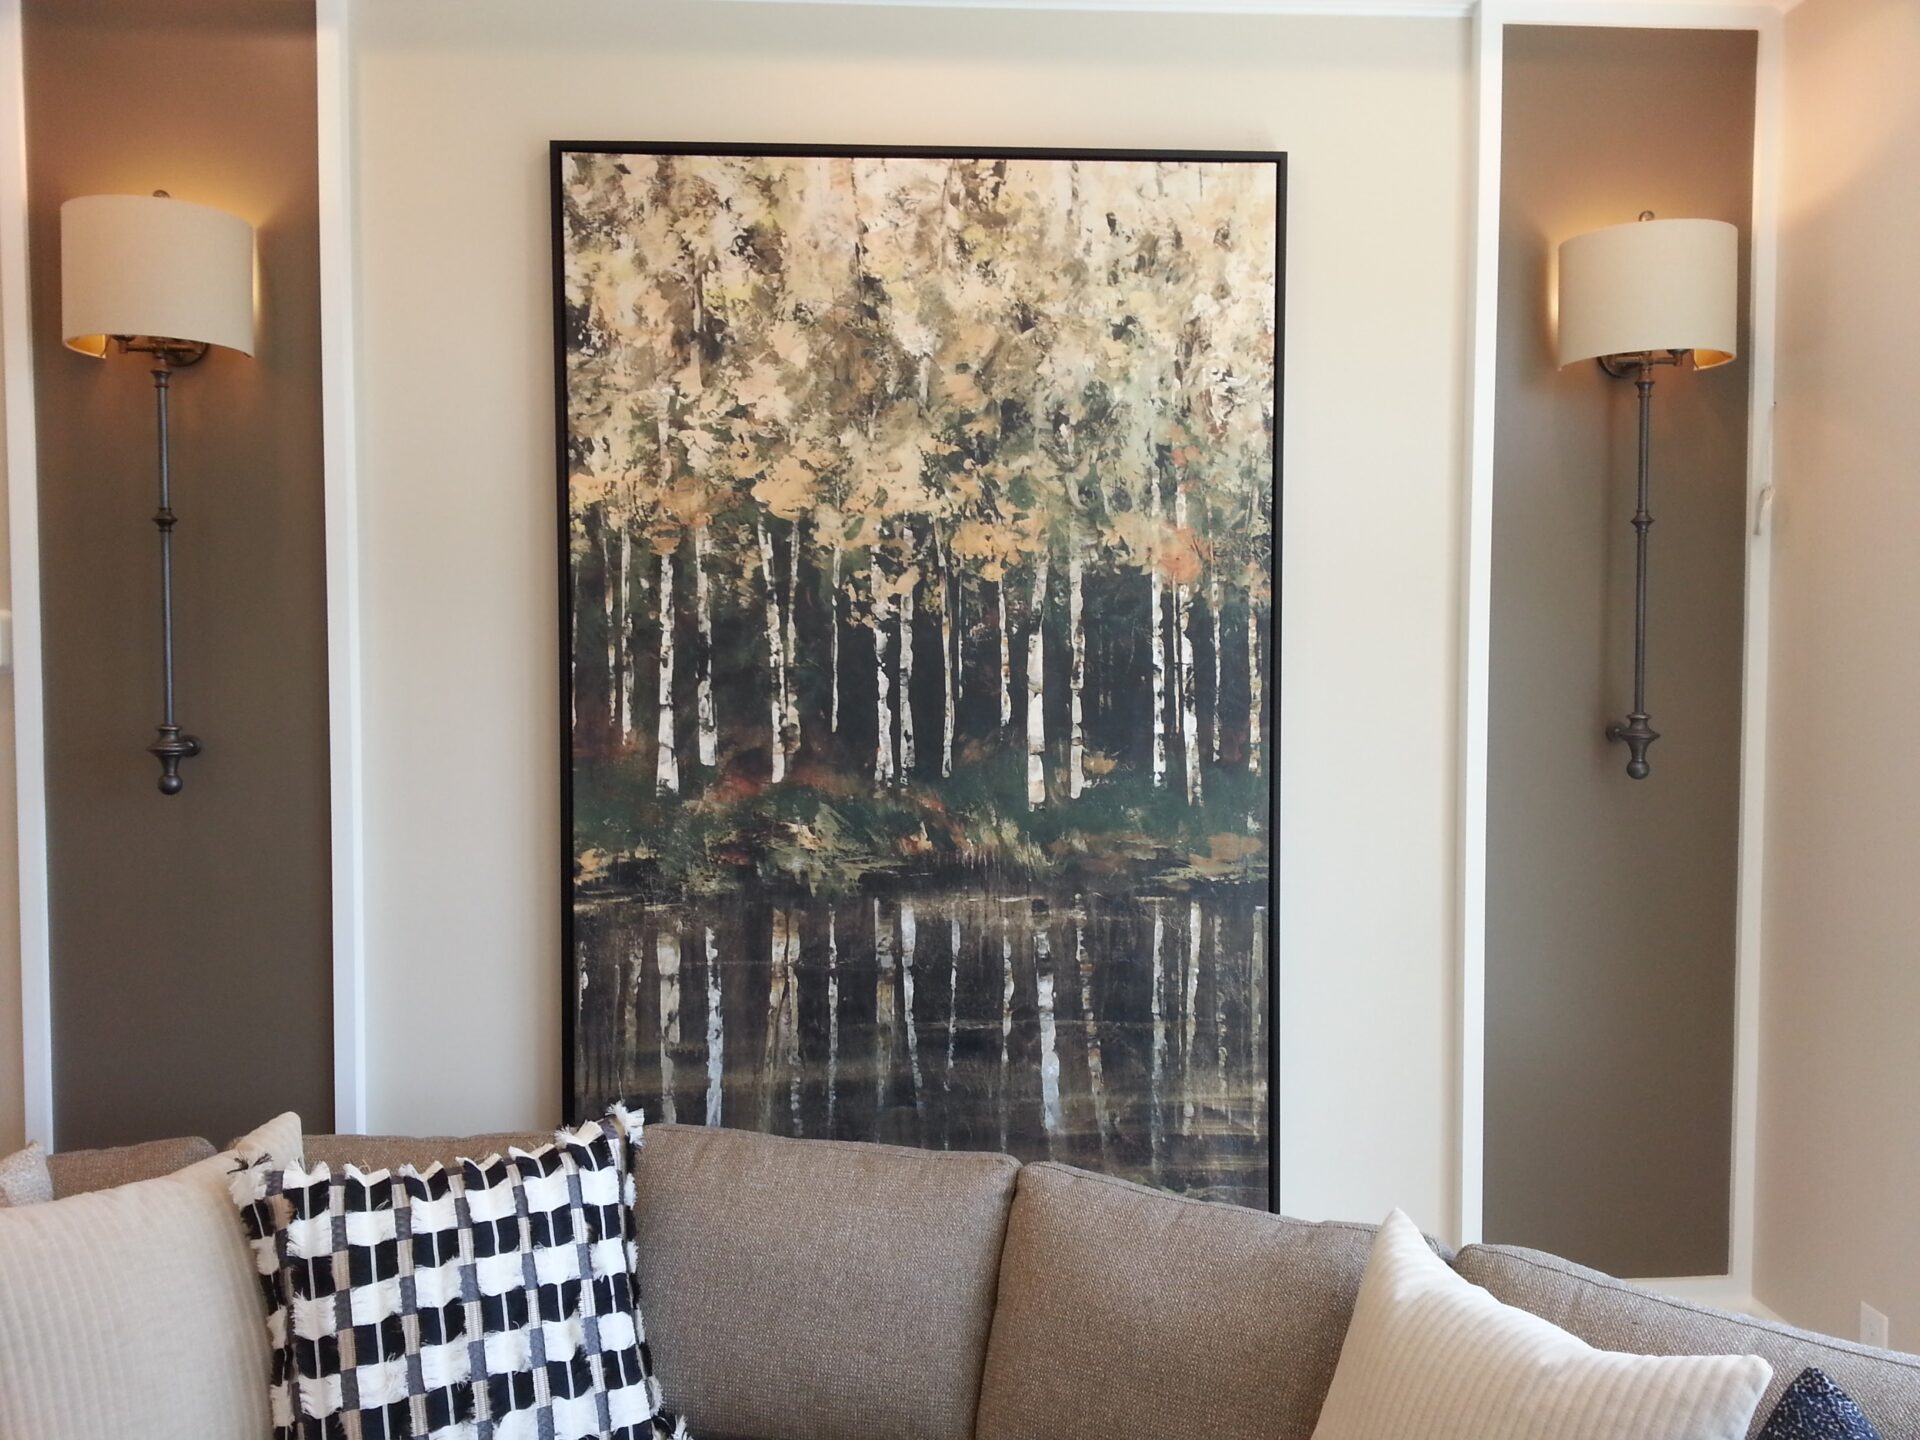 A large painting of trees in the middle of a living room.